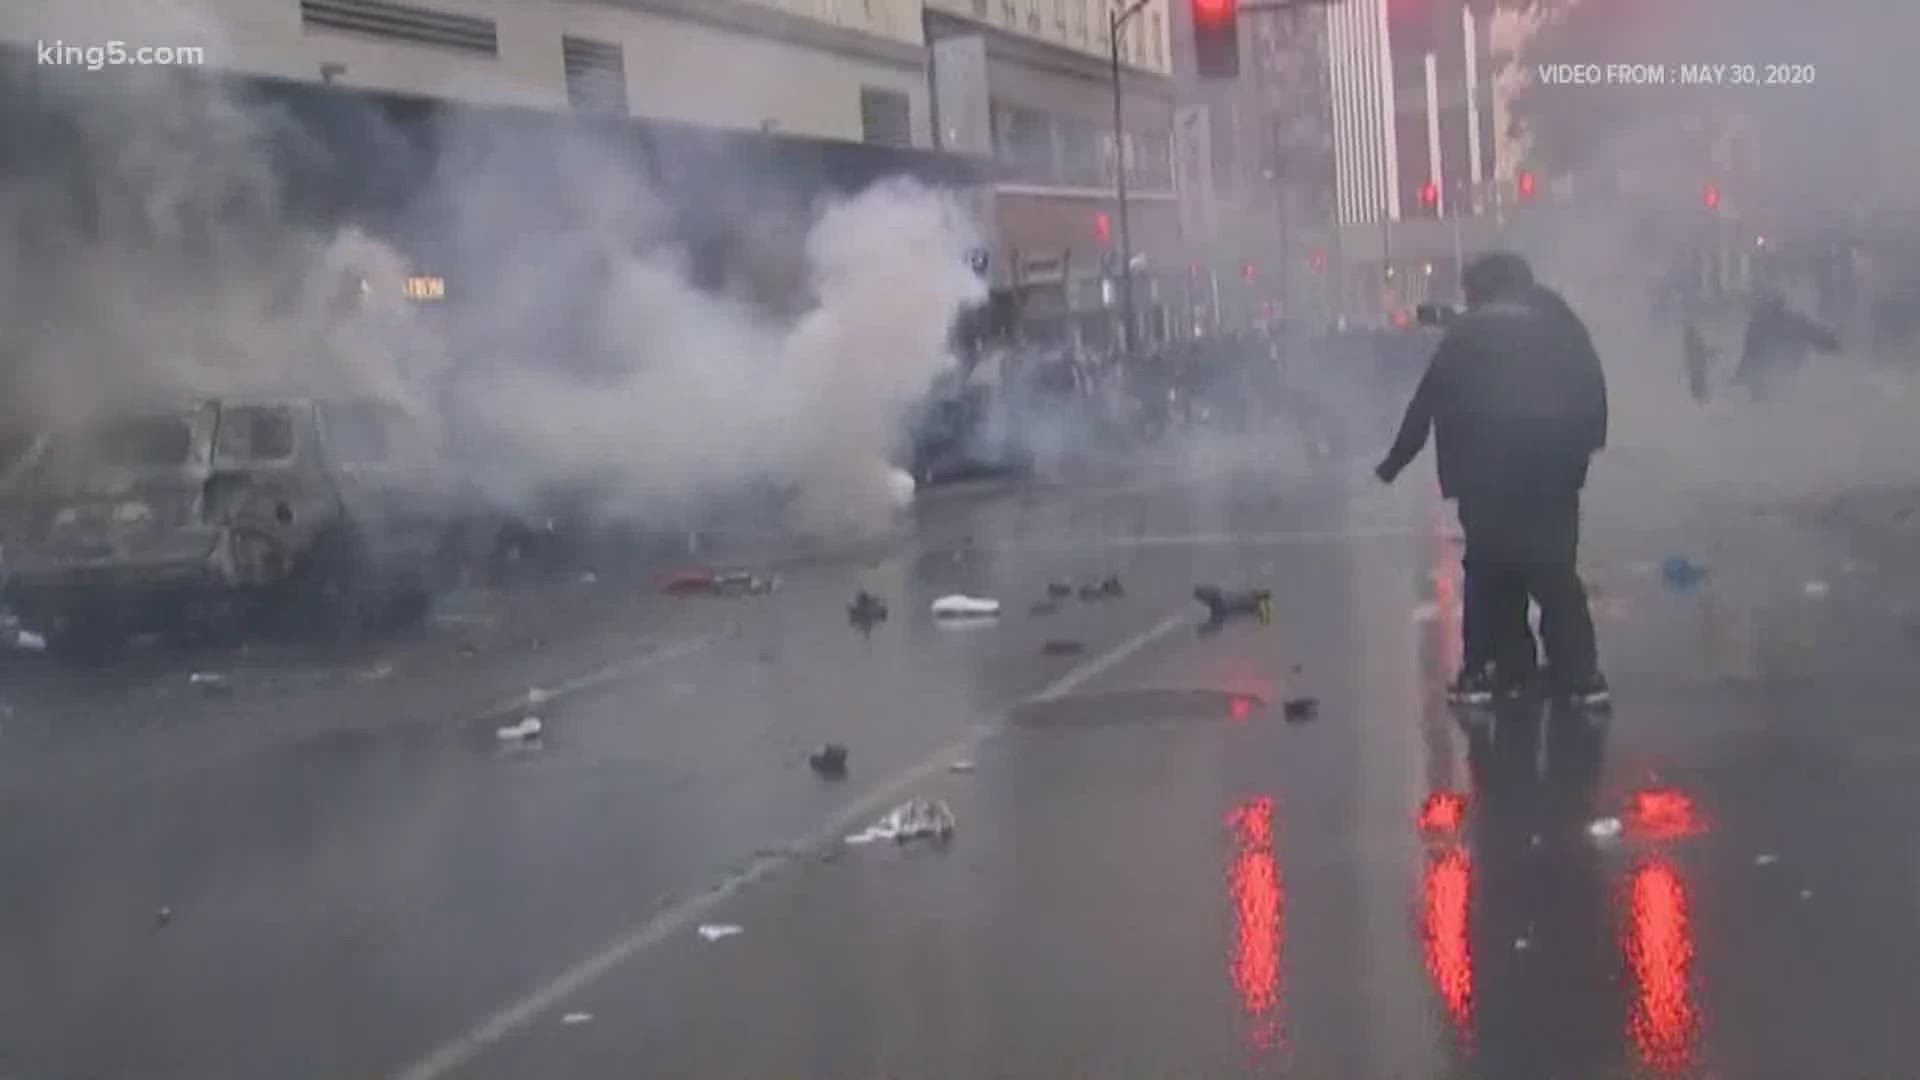 An ordinance approved by the Seattle City Council banning the use of tear gas and certain other crowd control implements by Seattle Police goes into effect.